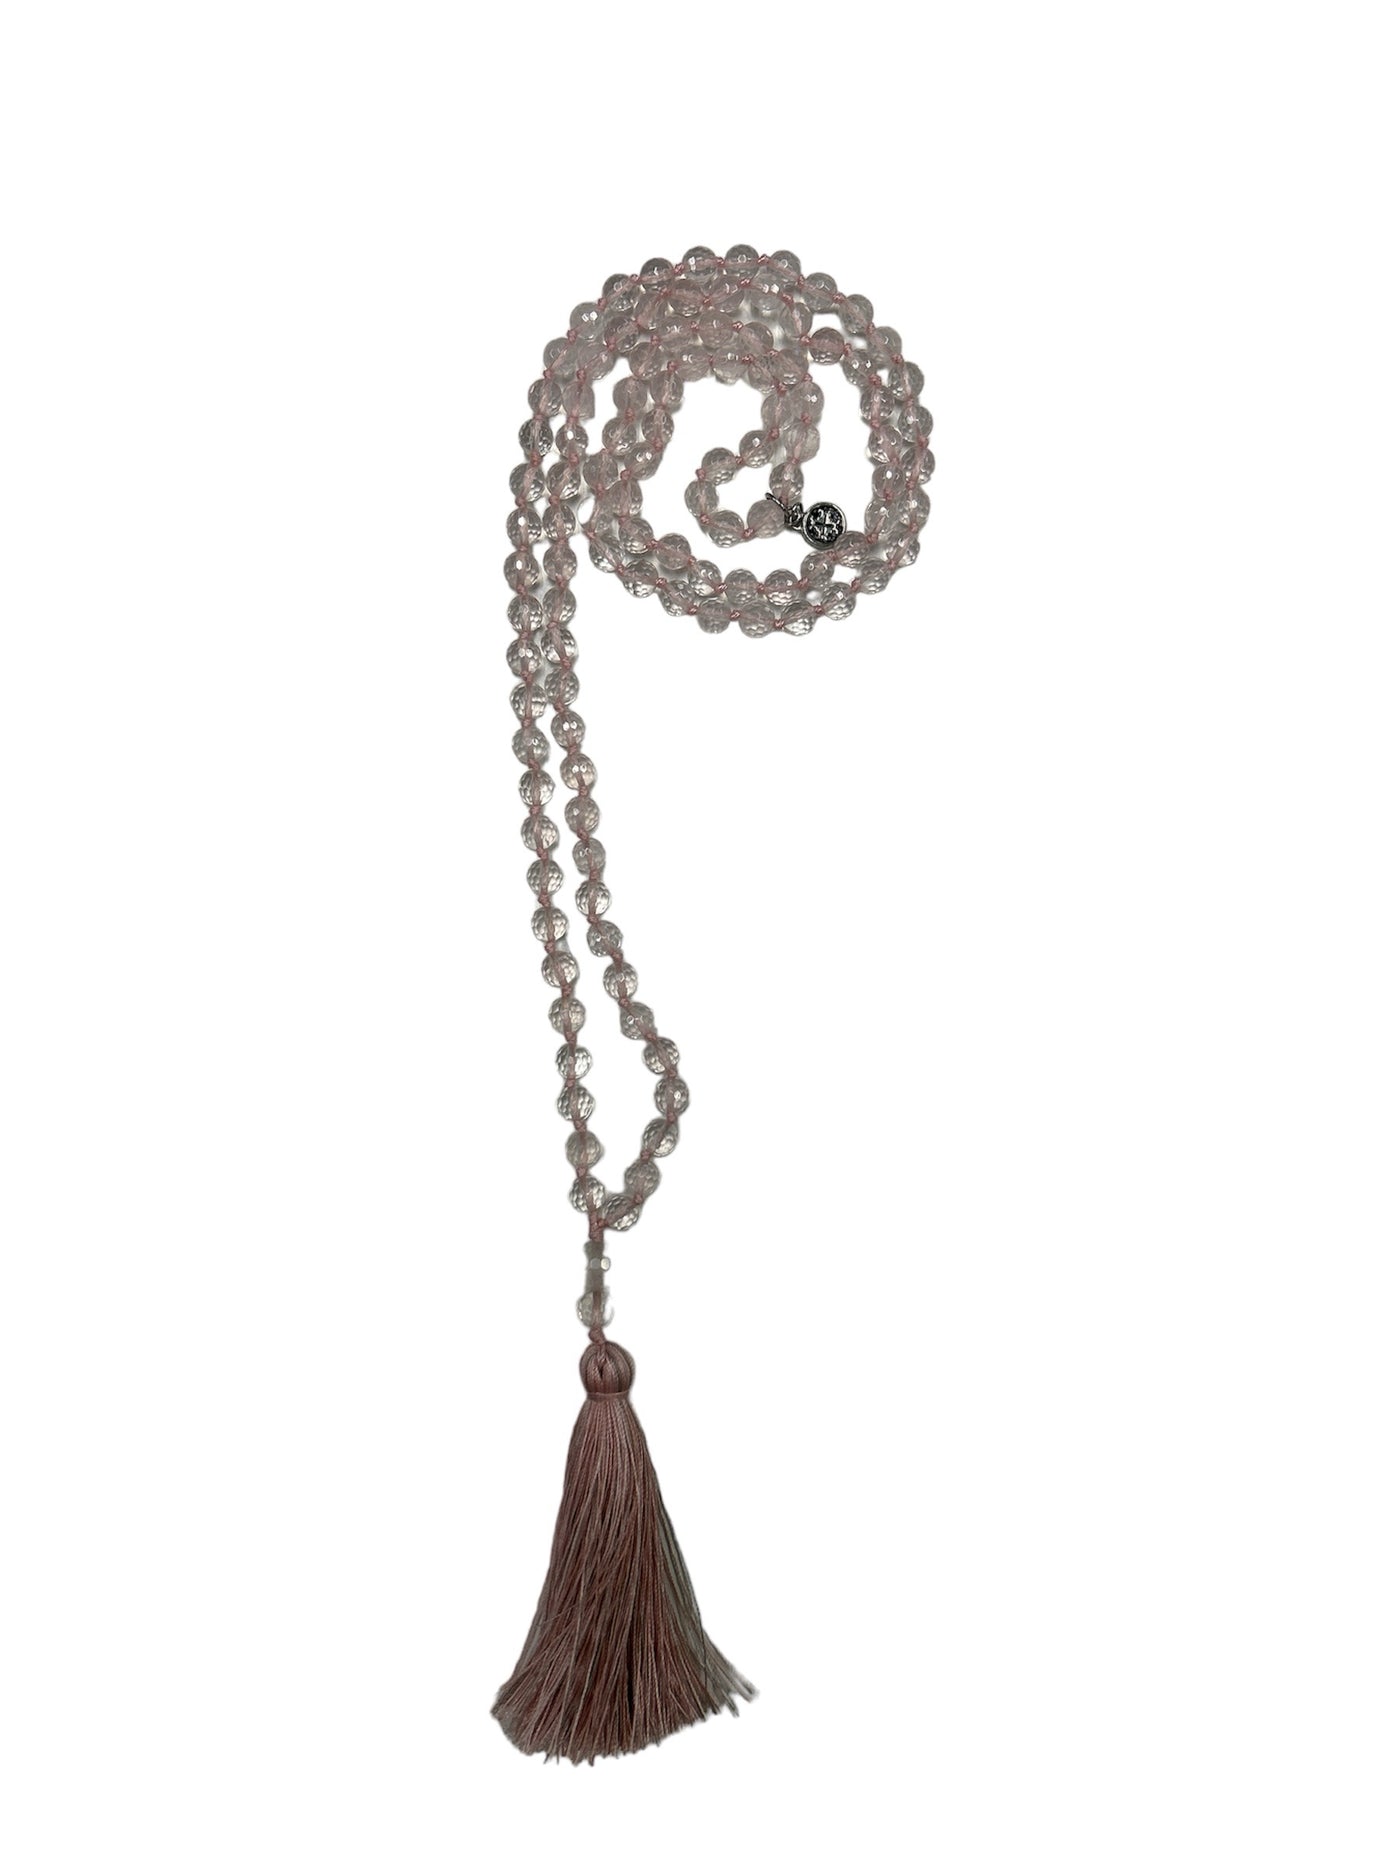 LOVE: Rose Quartz Faceted 108 Bead Hand-Knotted Adjustable Wrap Mala